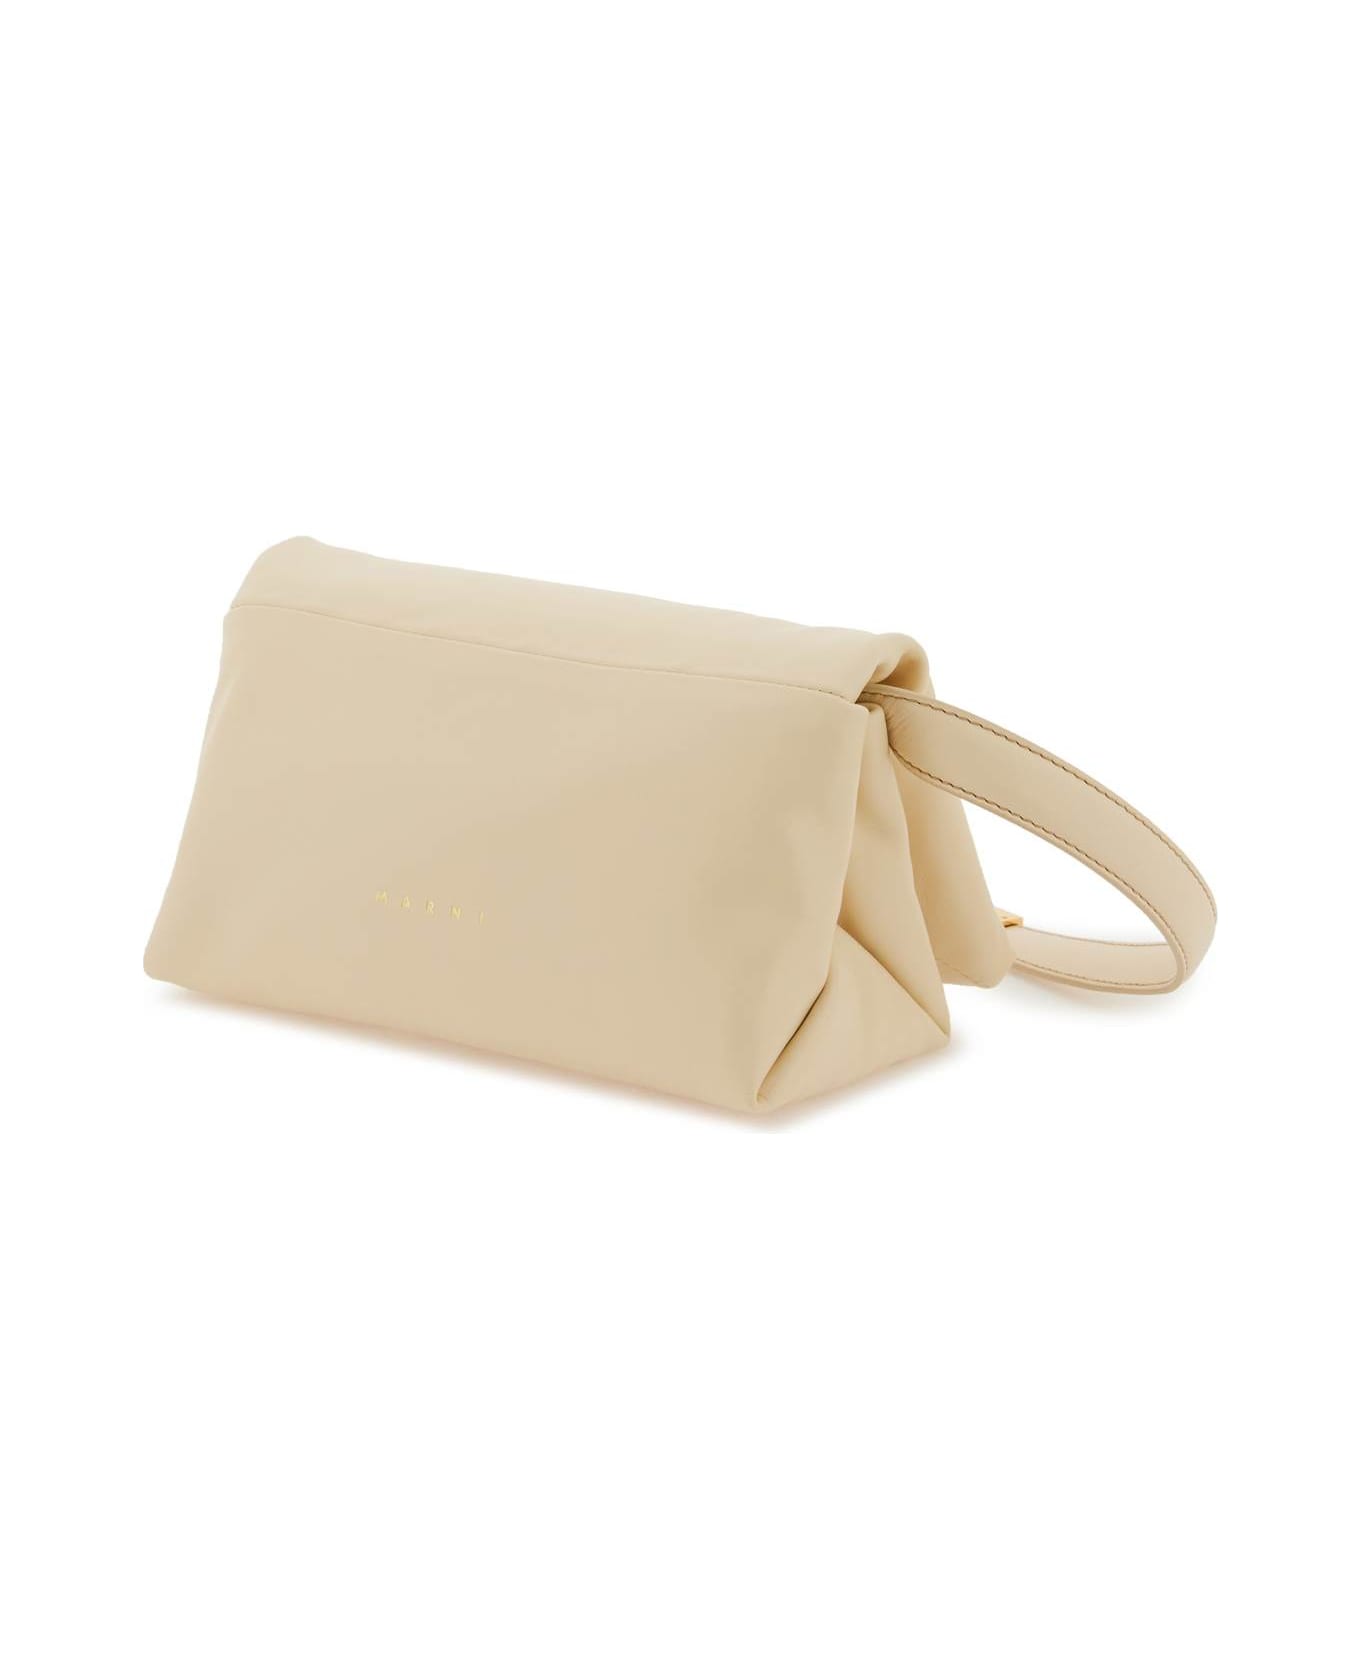 Marni Small Prisma Bag In Ivory Leather - IVORY トートバッグ